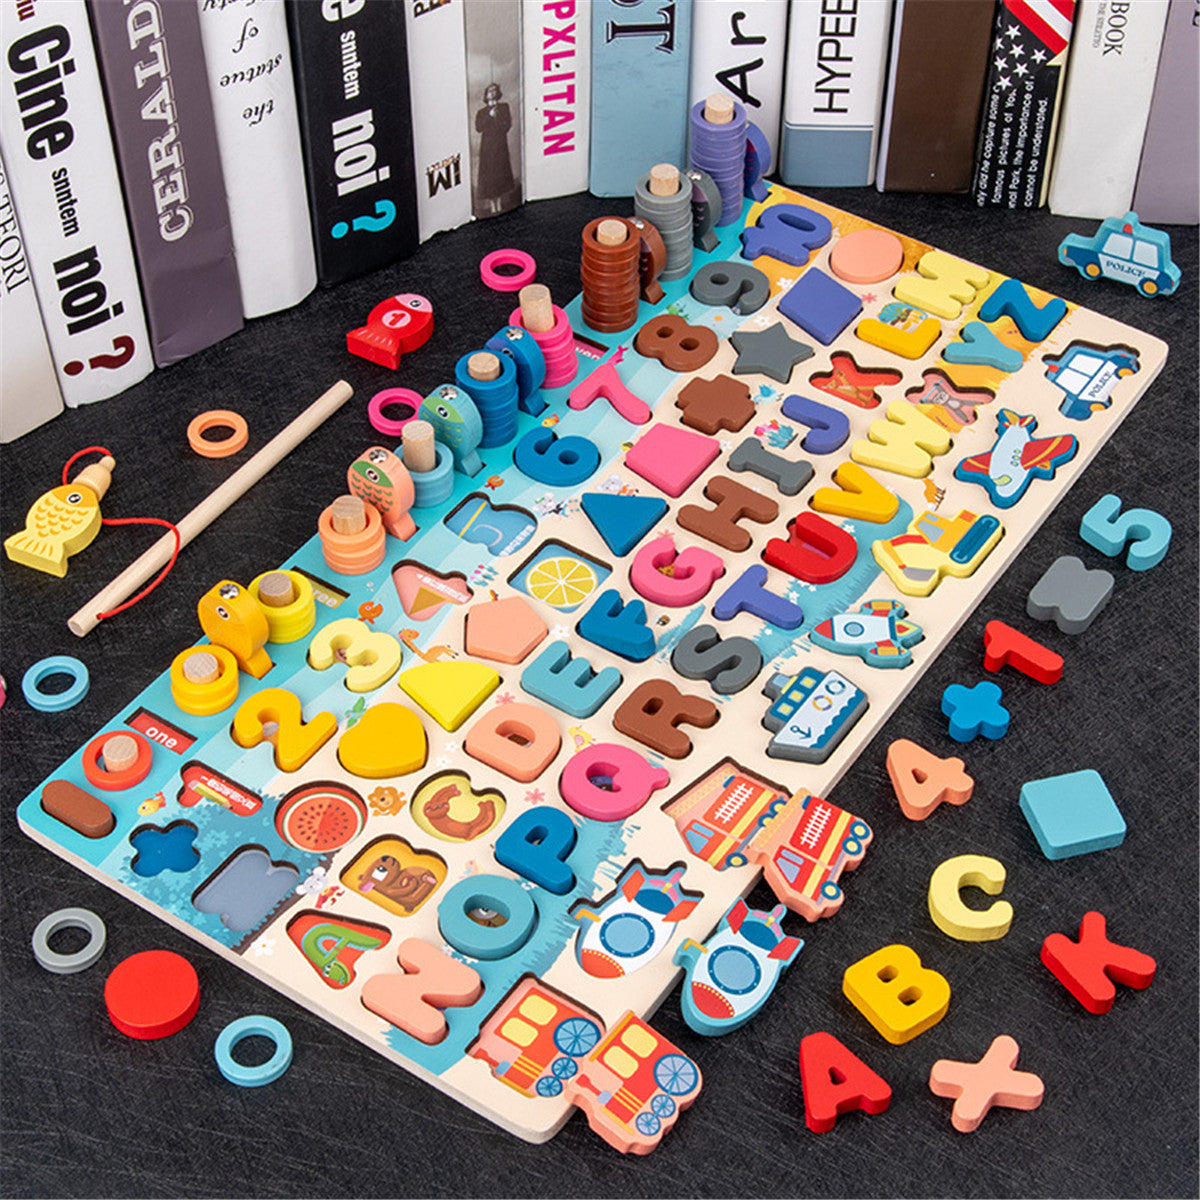 7 IN 1 Multi-Shape Wooden Colorful Jigsaw Puzzle Funny Fishing Early Education Toy for Kids Birthday Present